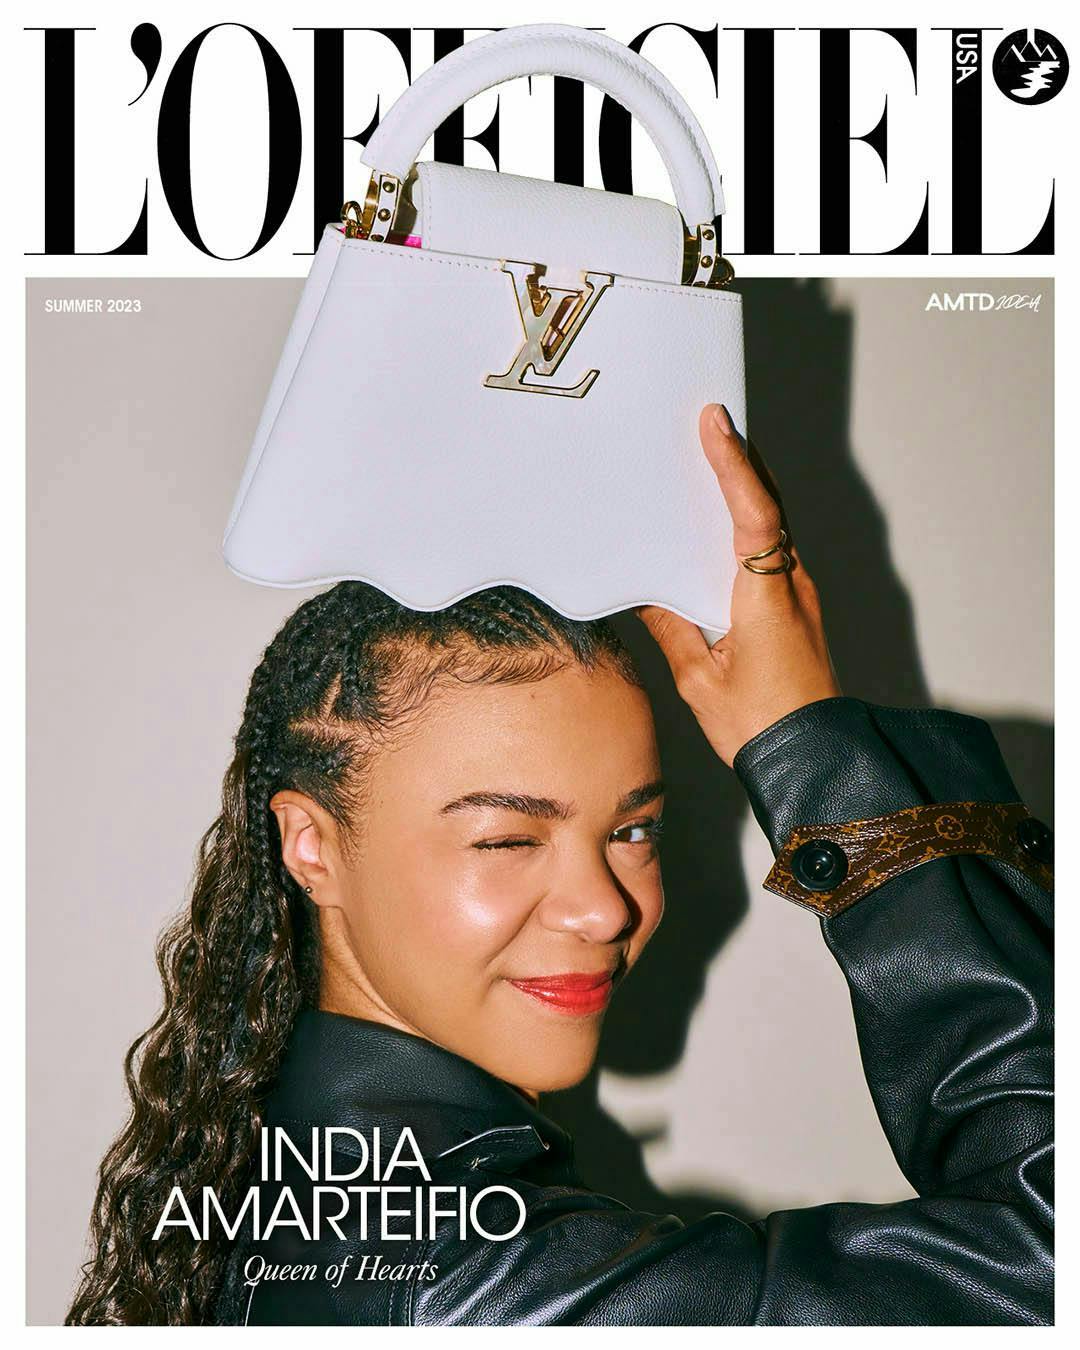 India Amarteifio on the cover of L'Officiel USA.